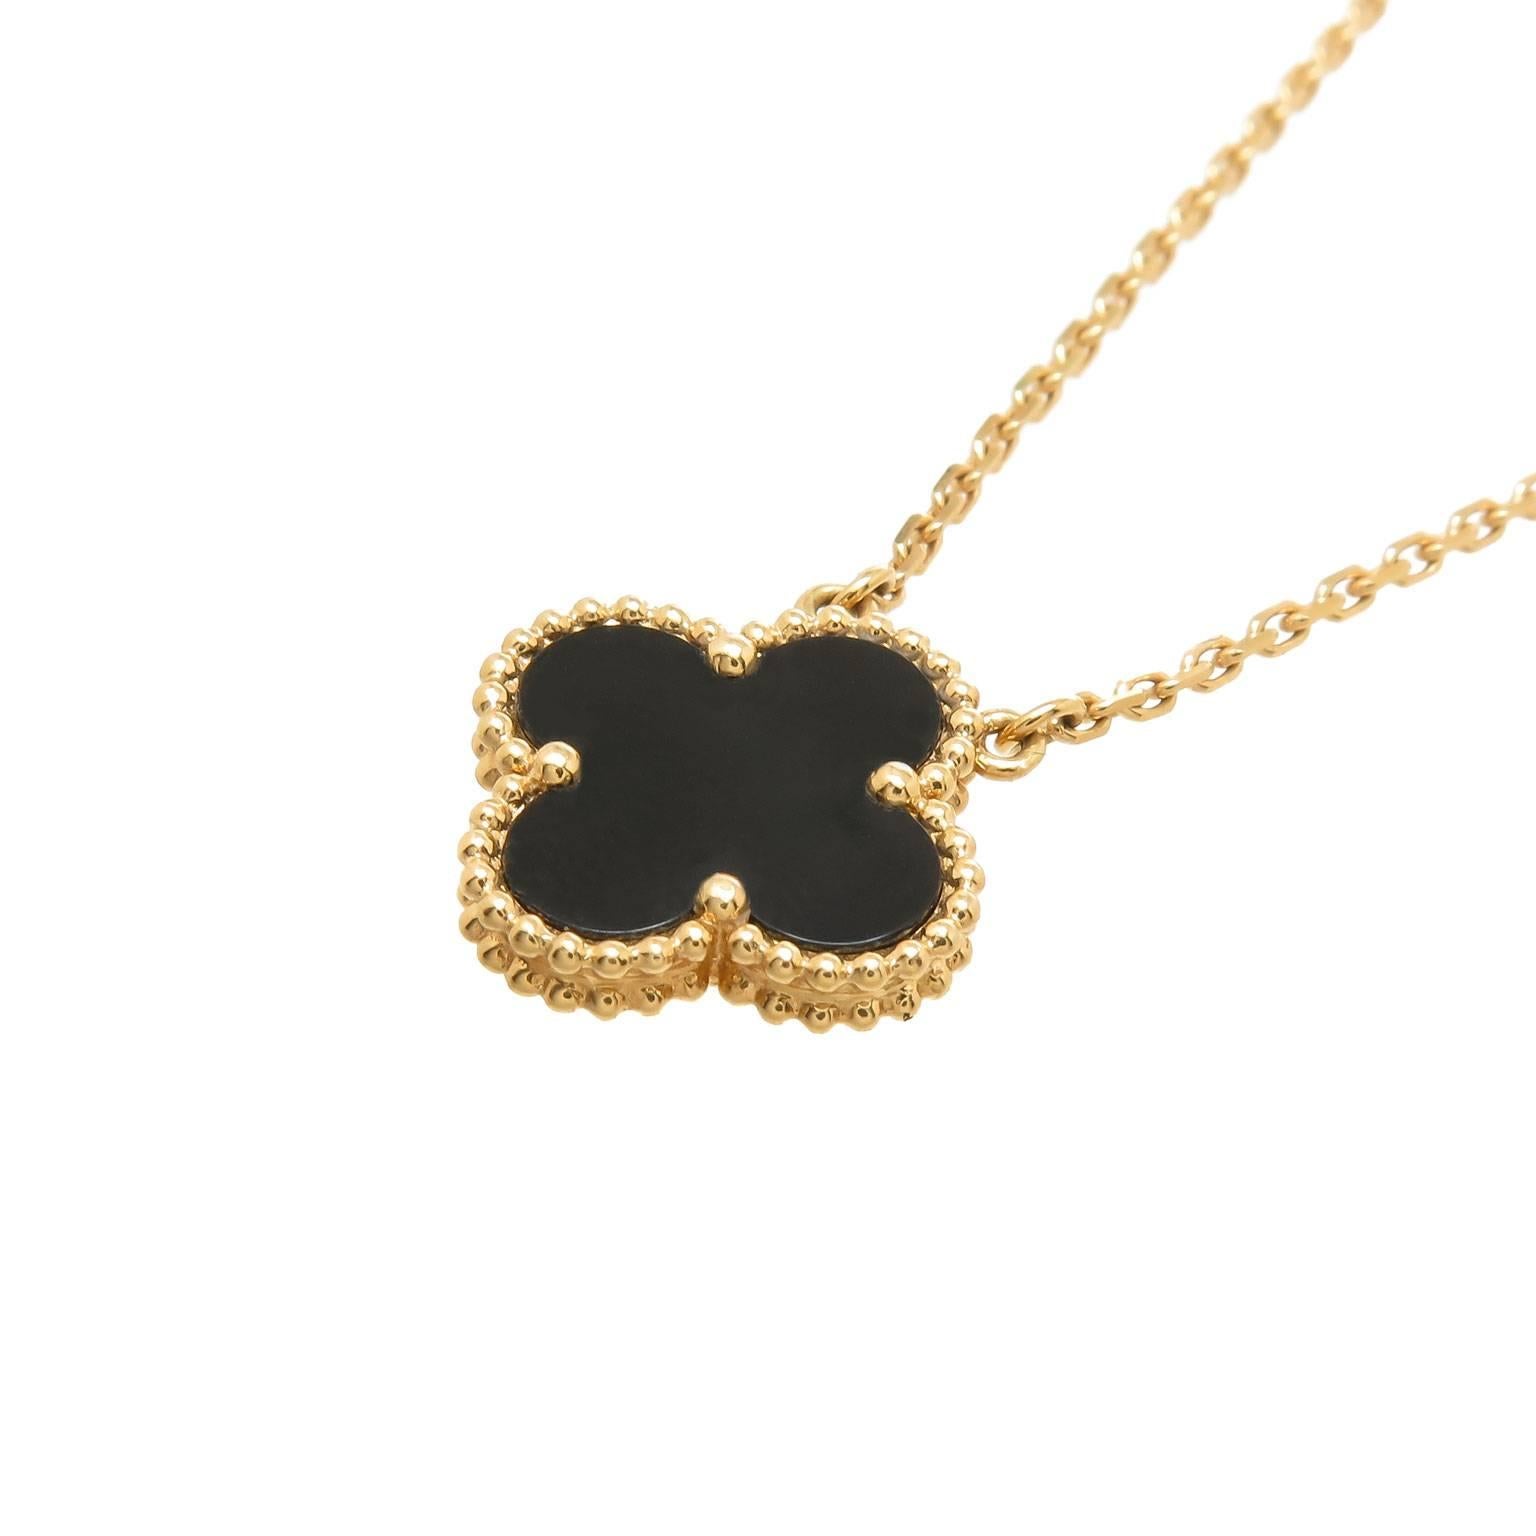 Circa 2010 Van Cleef and Arpels 18K Yellow Gold Vintage Collection Pendant Necklace set with Black Onyx. Total Length 17 inch and comes in VCA Suede Pouch.